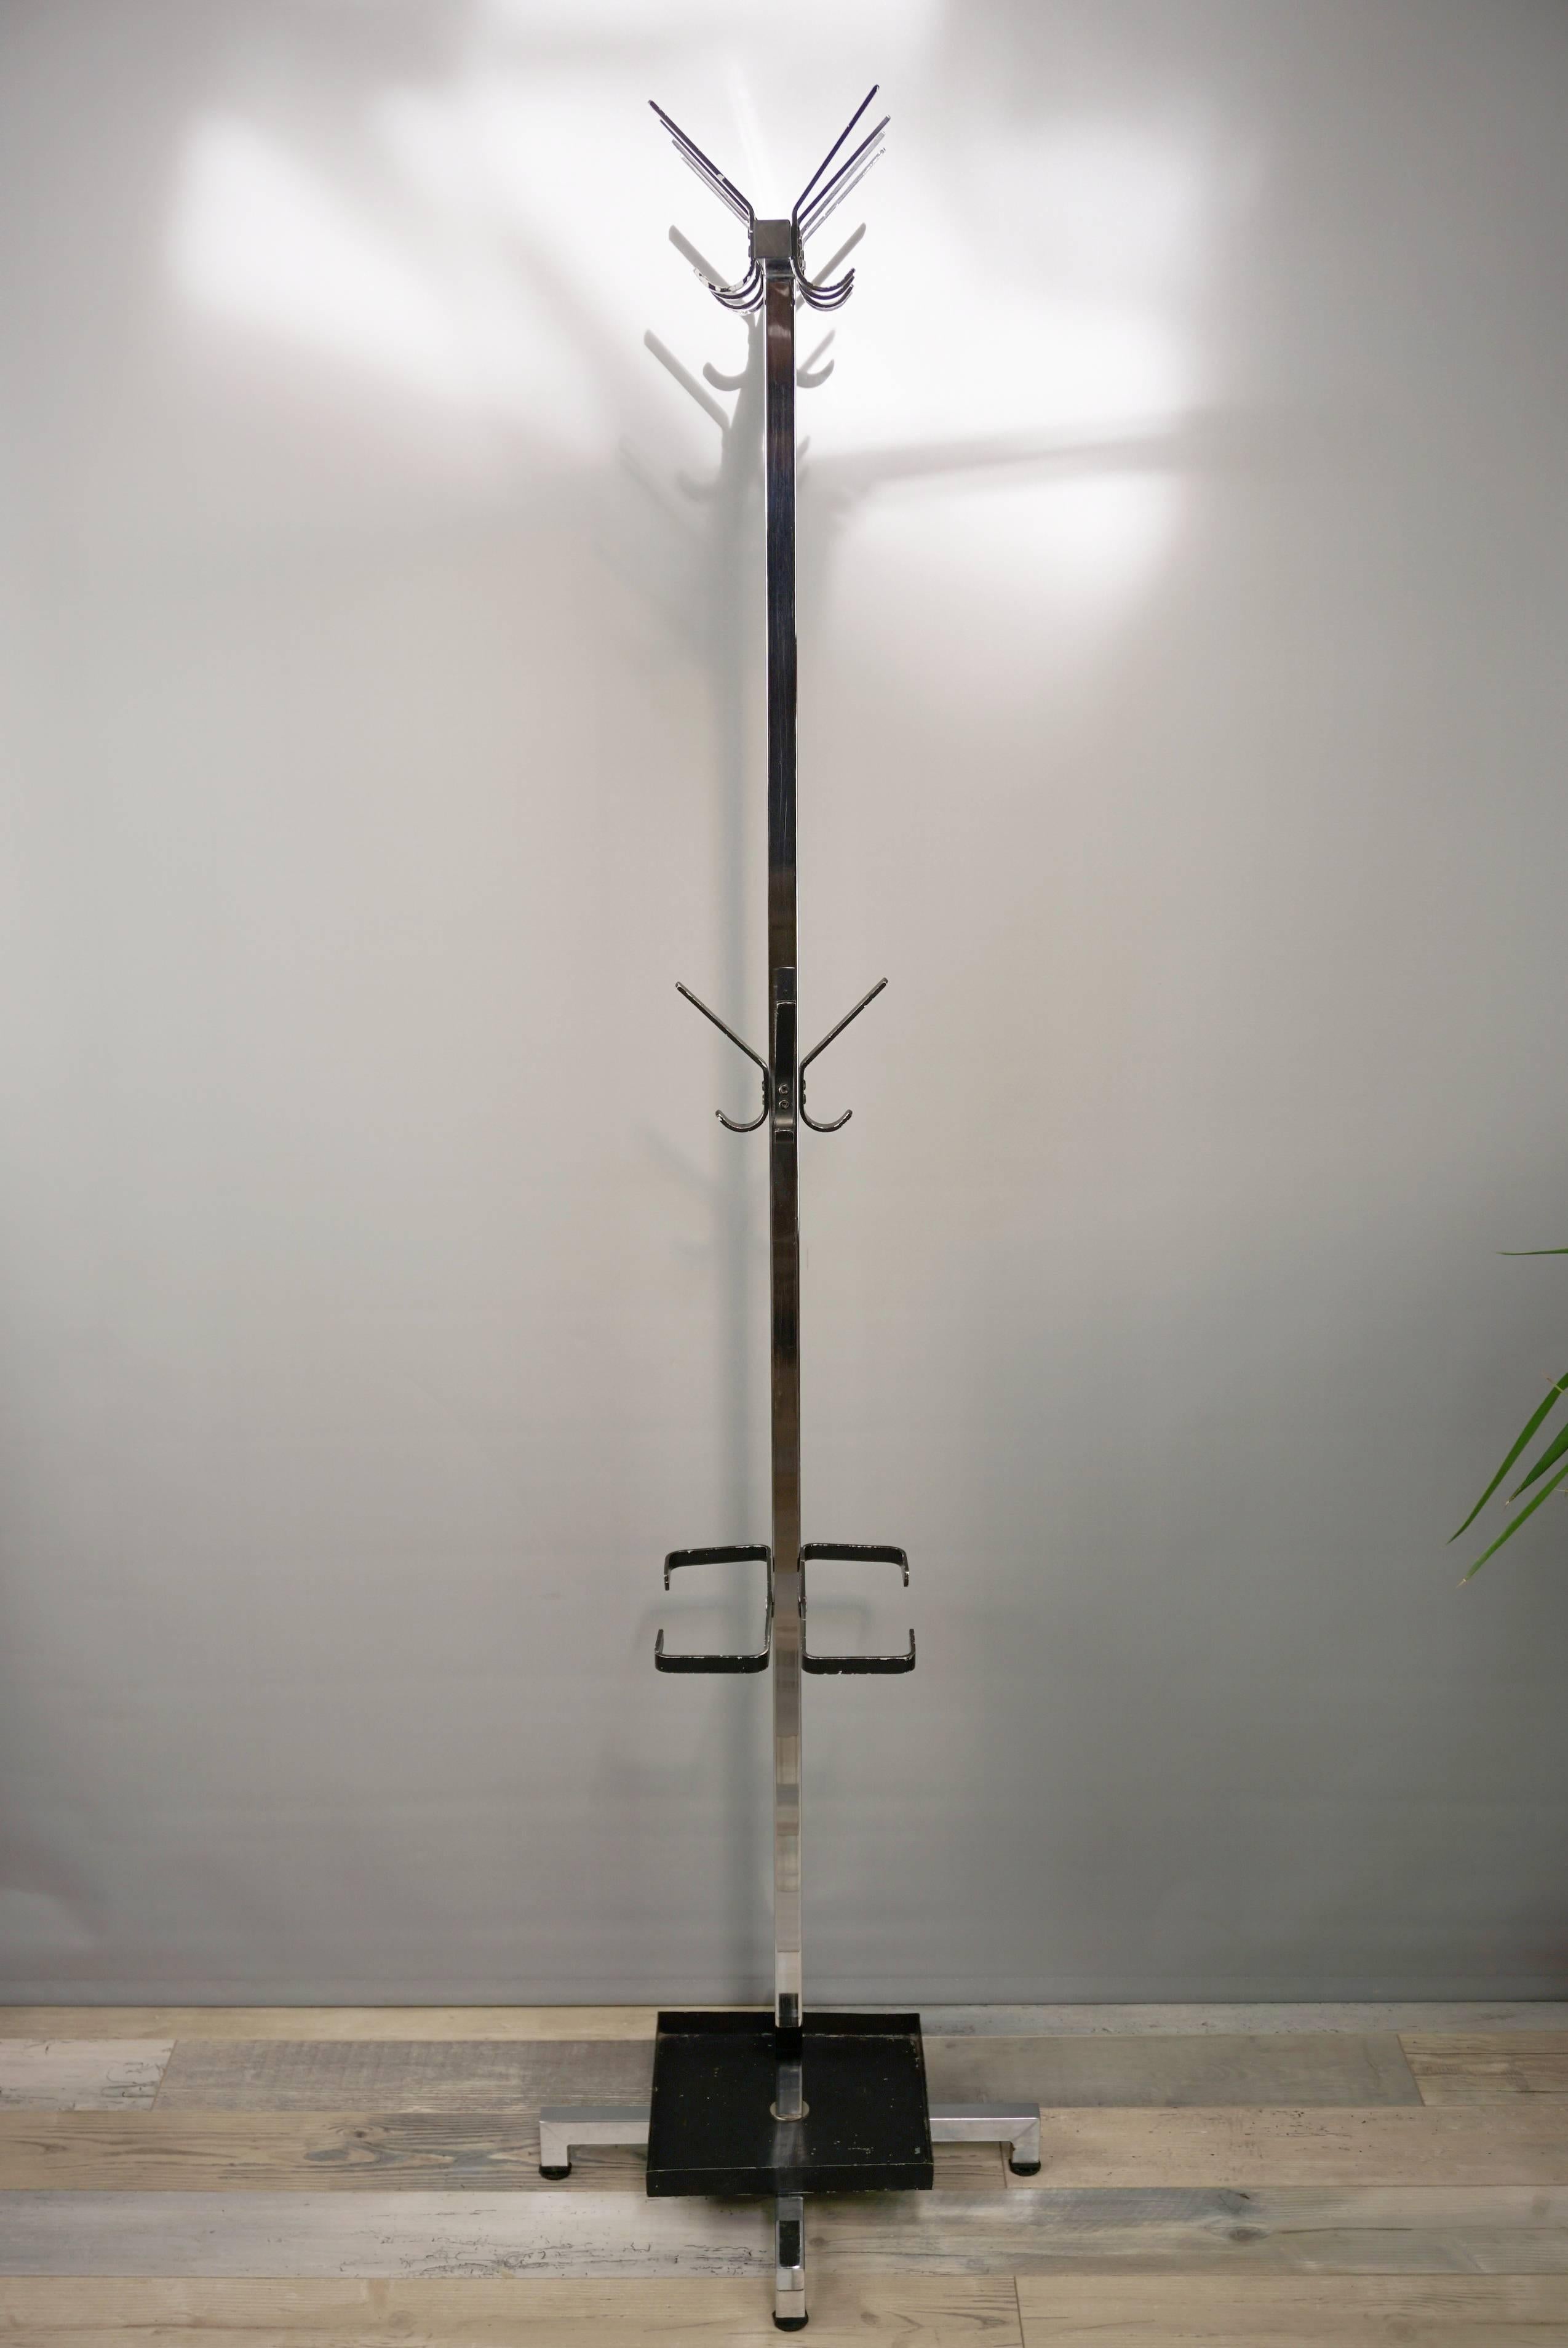 Streamlined and classy, with an undeniable industrial look, do not be afraid of its thorns as this all-metal coat rack, design from the 1960s and recalling the work of Willem Hendrik (WH) Gispen (pioneer of functionalist Dutch design) will be the